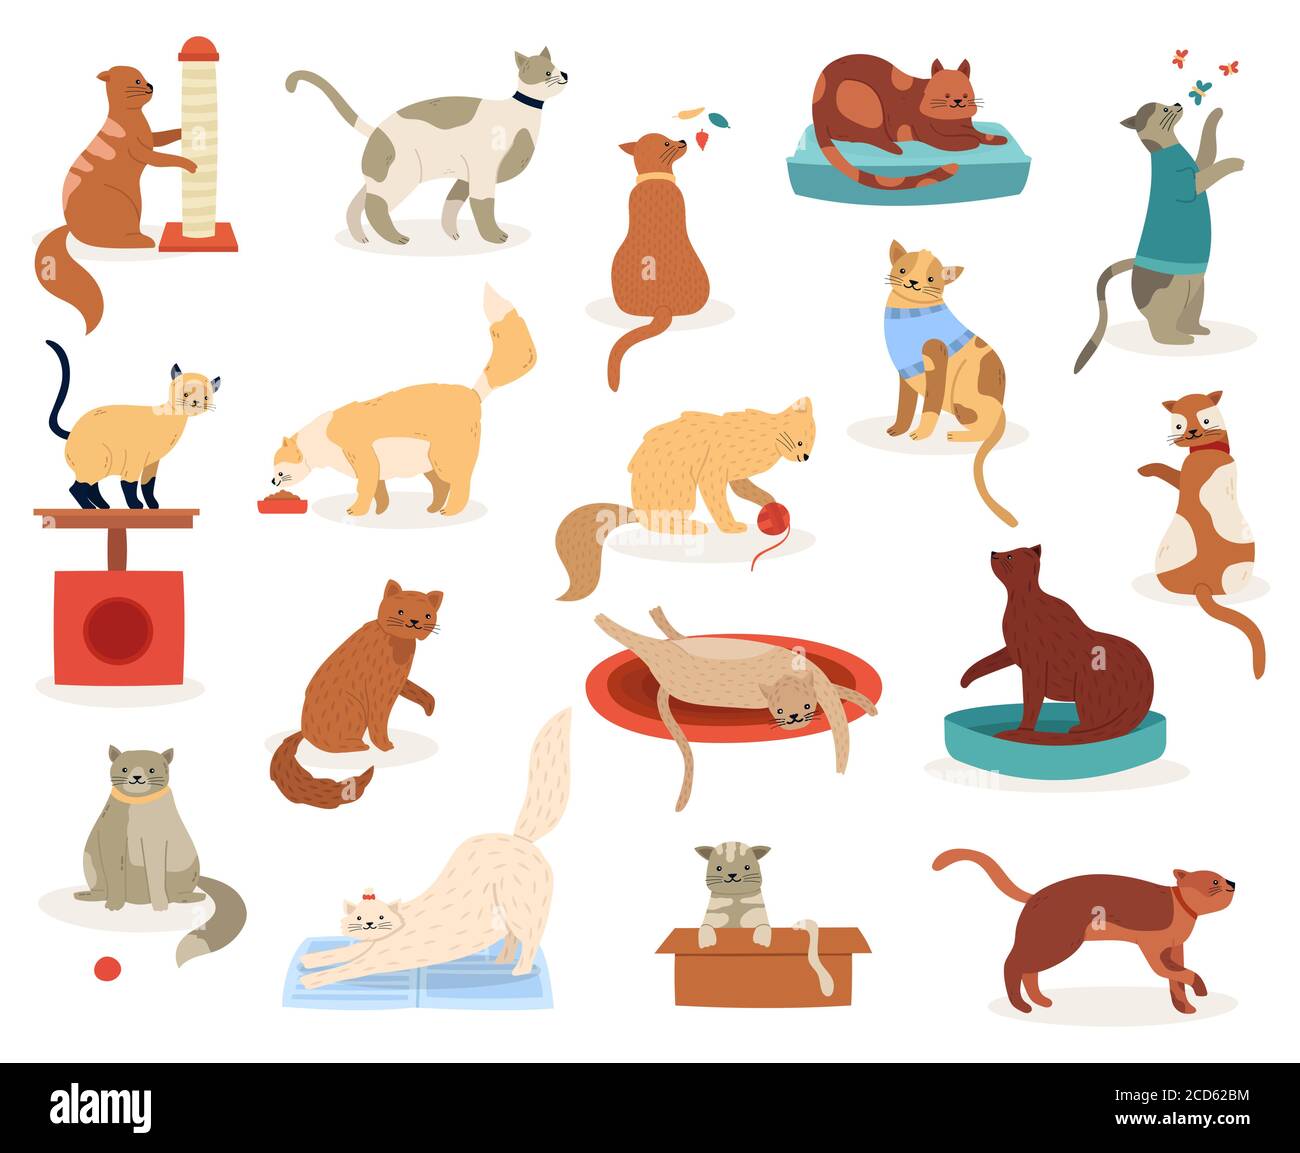 Cartoon cats. Cute kitten characters, funny fluffy playful cats, pedigree breeds pets, adorable kitty pets vector illustration icons set Stock Vector